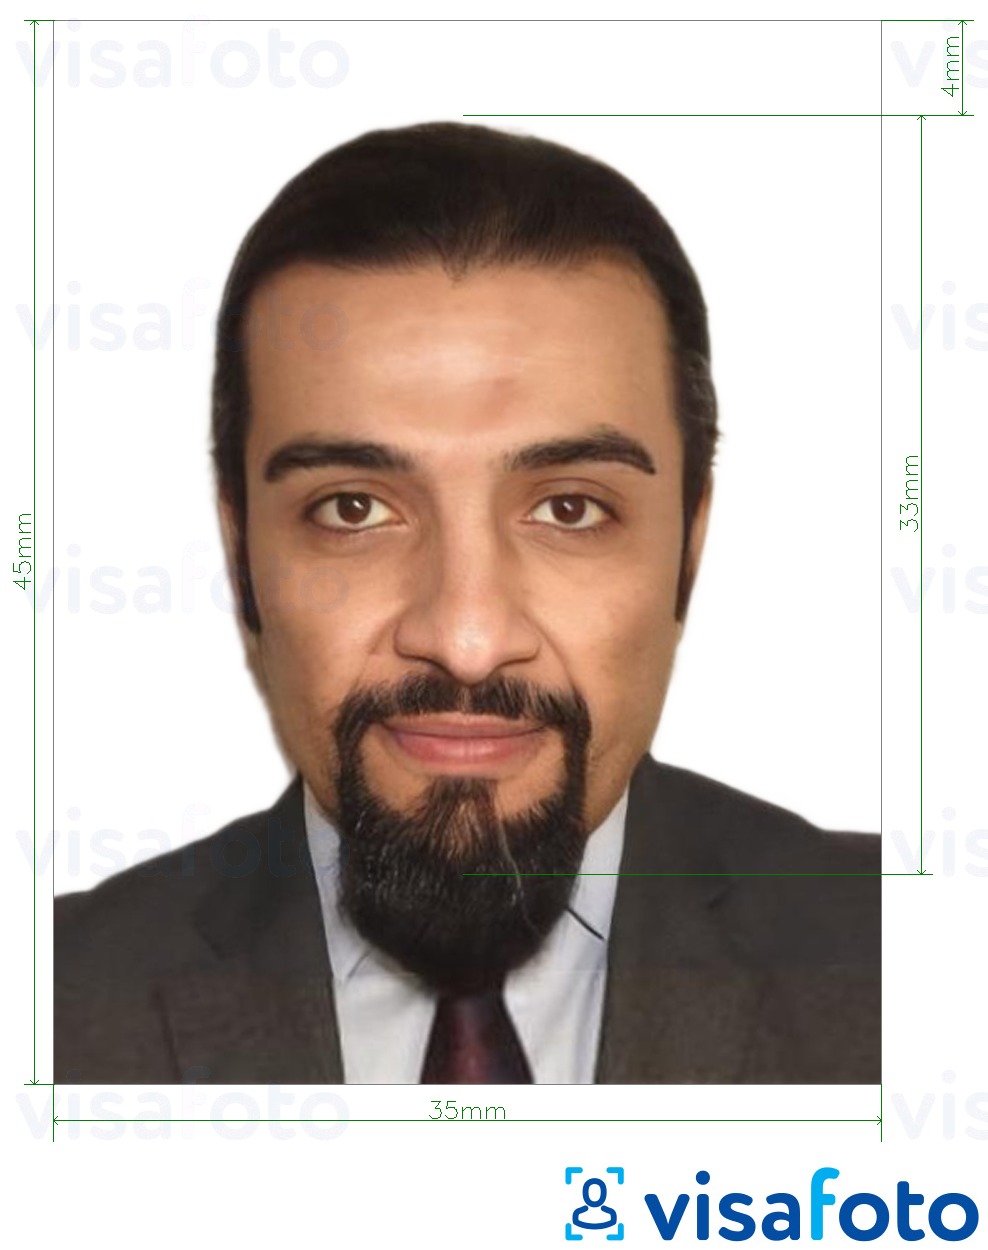 Example of photo for Tunisia visa 3.5x4.5 cm (35x45 mm) with exact size specification